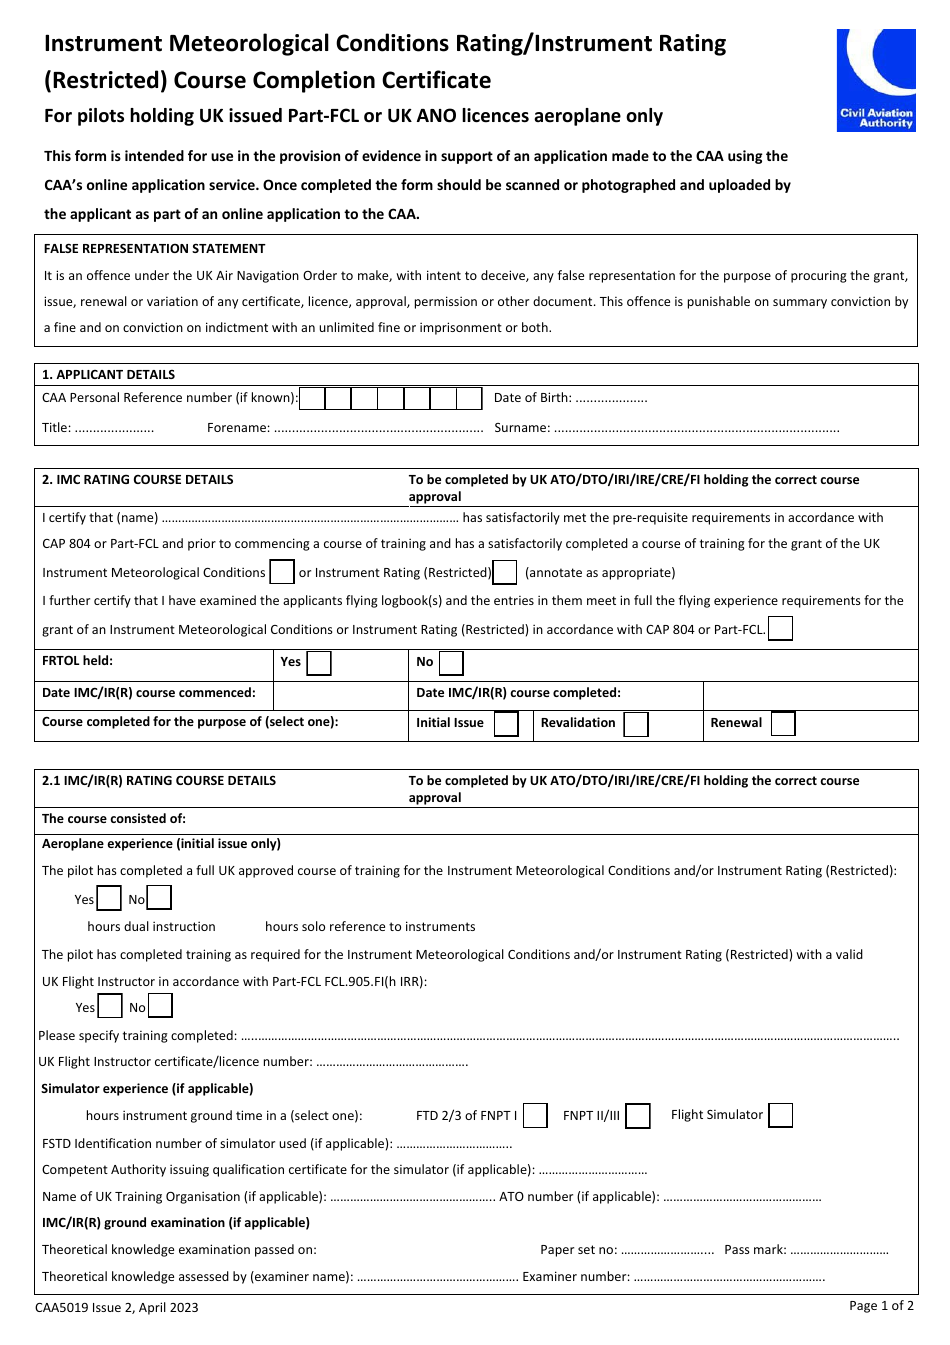 Form CAA5019 Instrument Meteorological Conditions Rating / Instrument Rating (Restricted) Course Completion Certificate - United Kingdom, Page 1